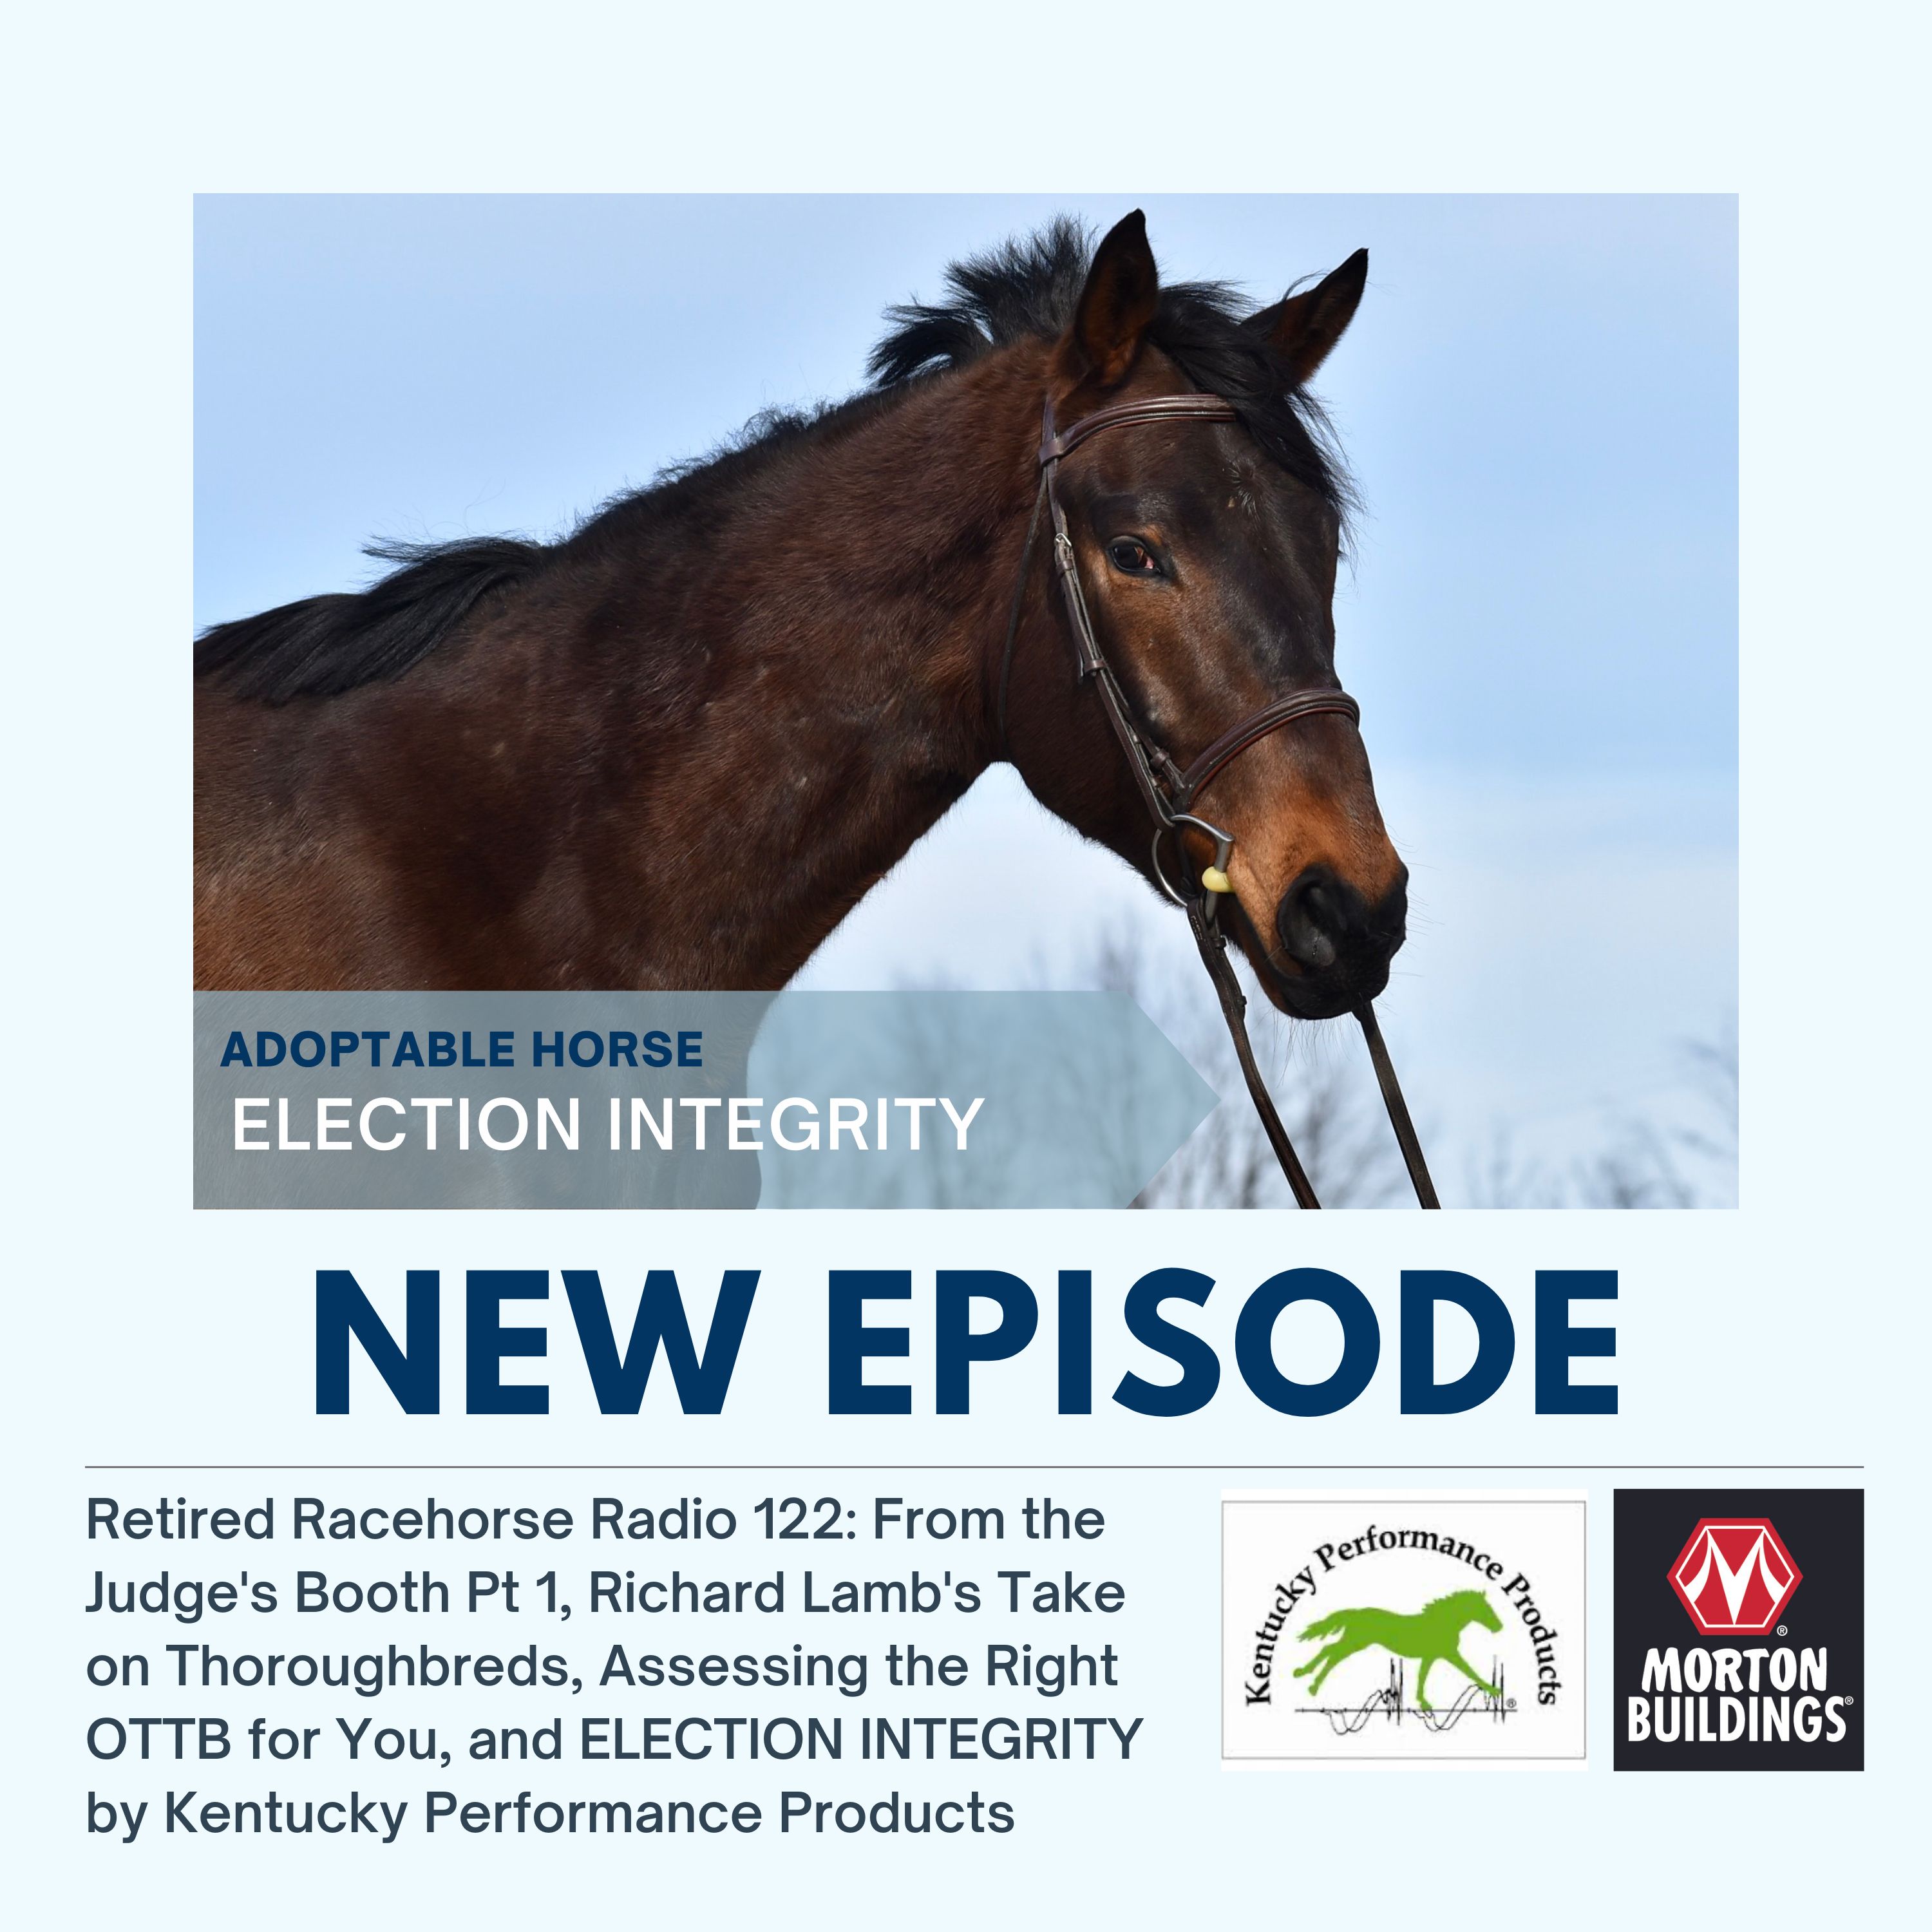 From the Judge’s Booth Pt 1, Richard Lamb’s Take on Thoroughbreds, Assessing the Right OTTB for You, and ELECTION INTEGRITY by Kentucky Performance Products